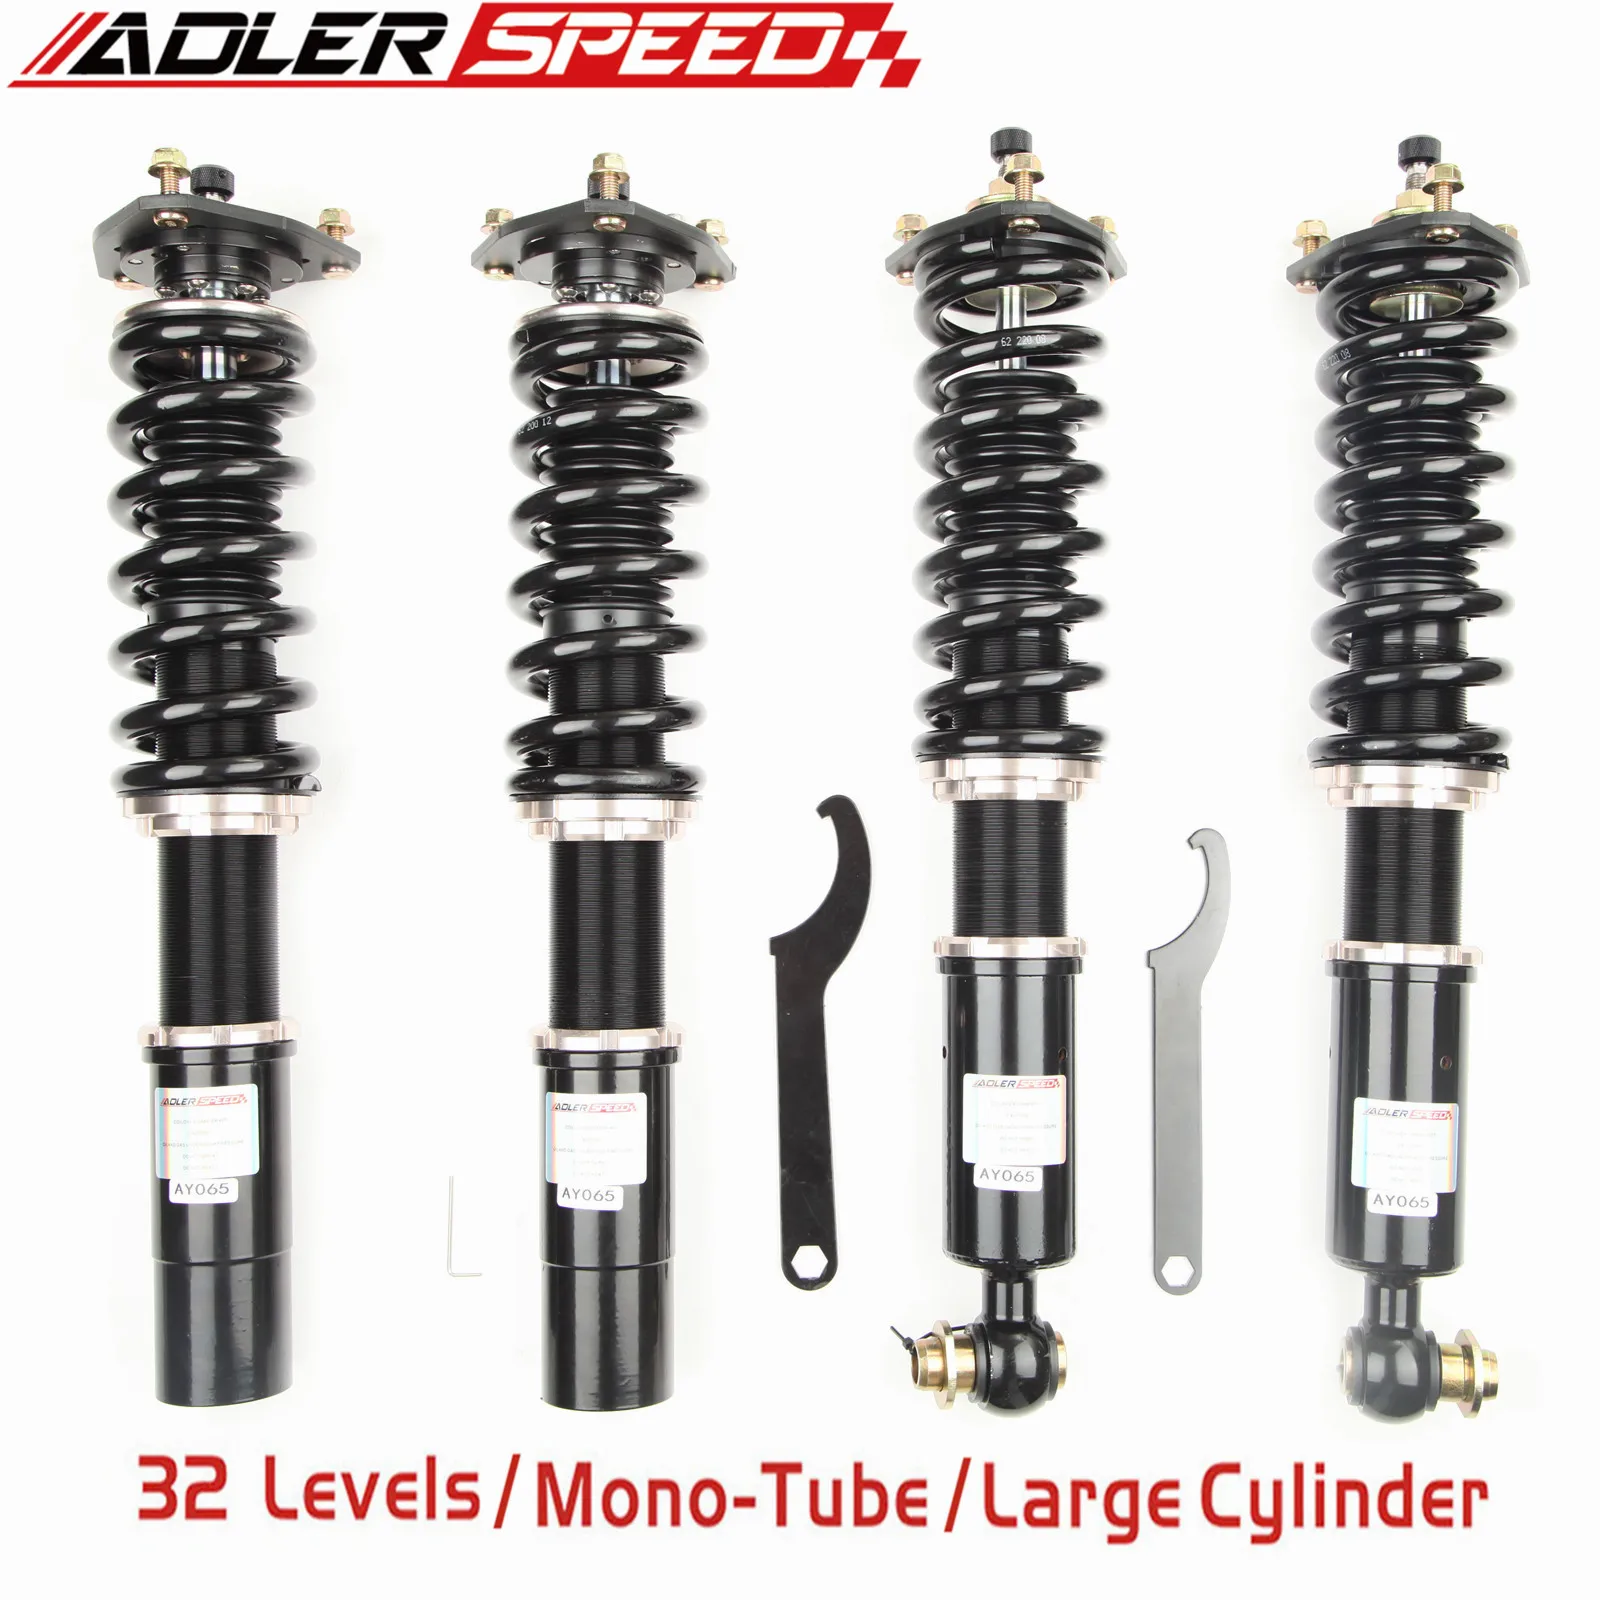 

ADLERSPEED 32 Levels Mono Tube Coilovers Suspension For 97-03 BMW E39 Sedan RWD 525 528 530 540